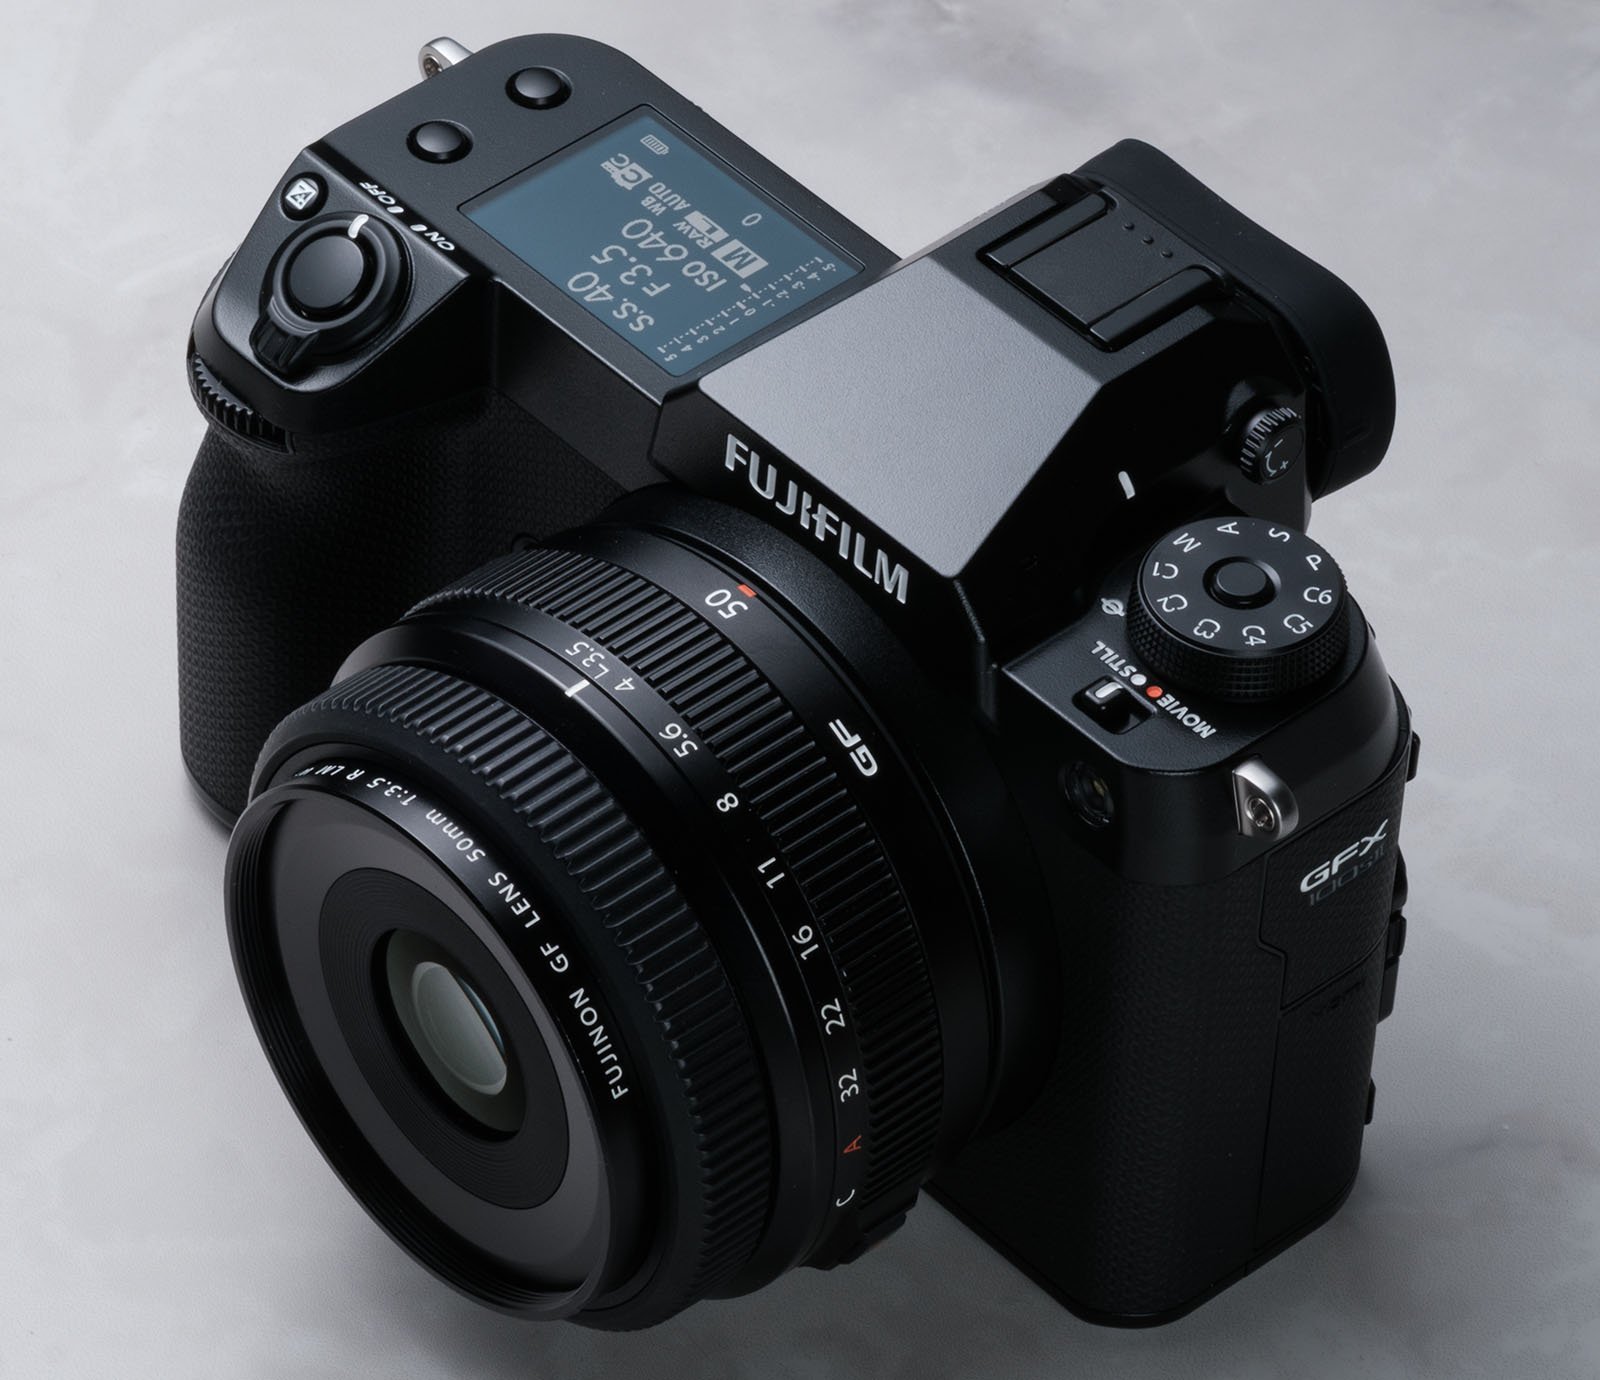 A Fujifilm GFX digital camera is shown. The camera features a large lens with various settings marked, a top display screen, and multiple buttons and dials for different camera functions. The body is black and has a textured grip. The camera rests on a light surface.